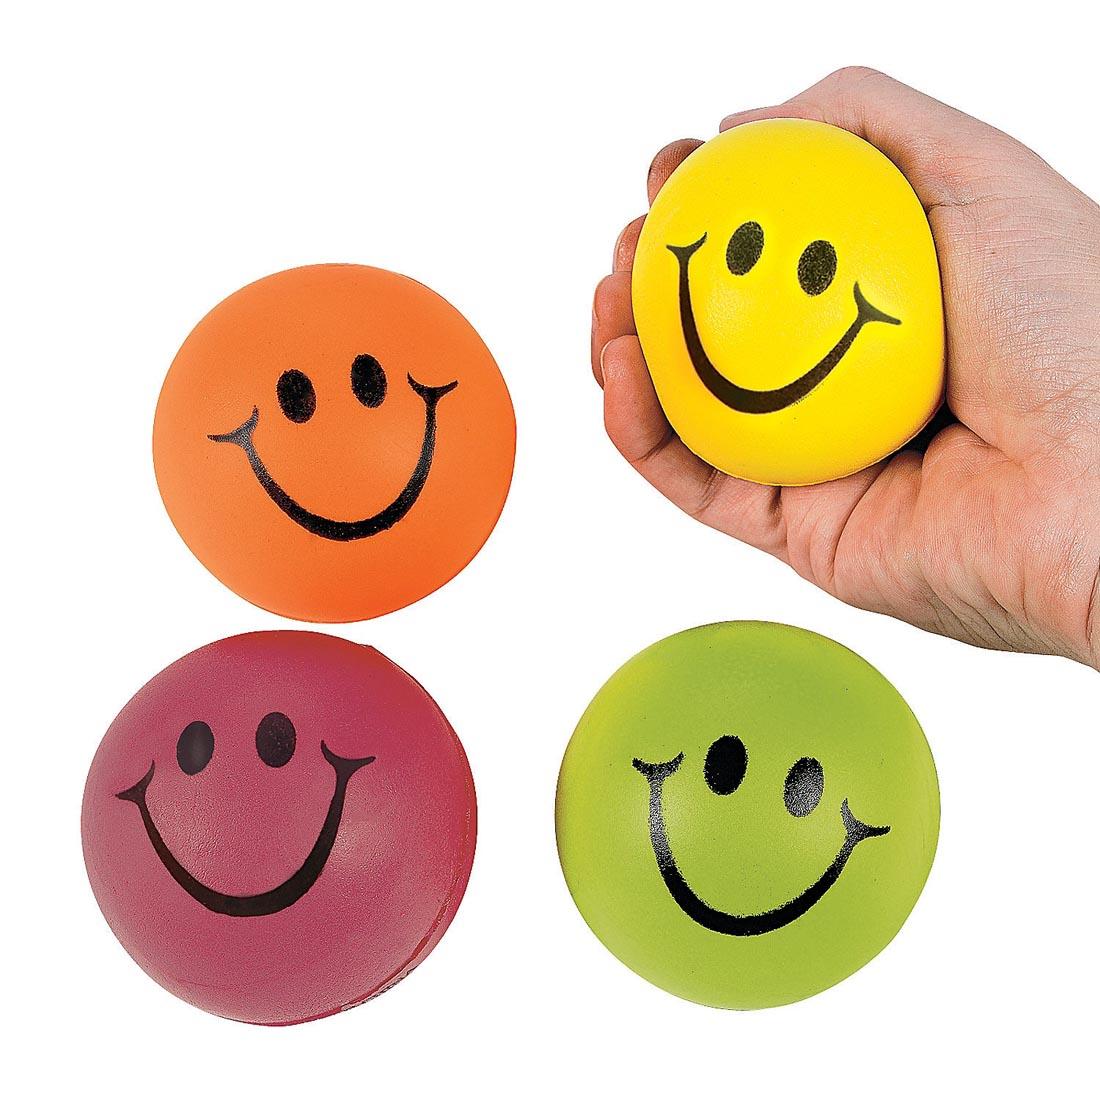 four Neon Smile Face Stress Balls by Fun Express with a hand squeezing one of them